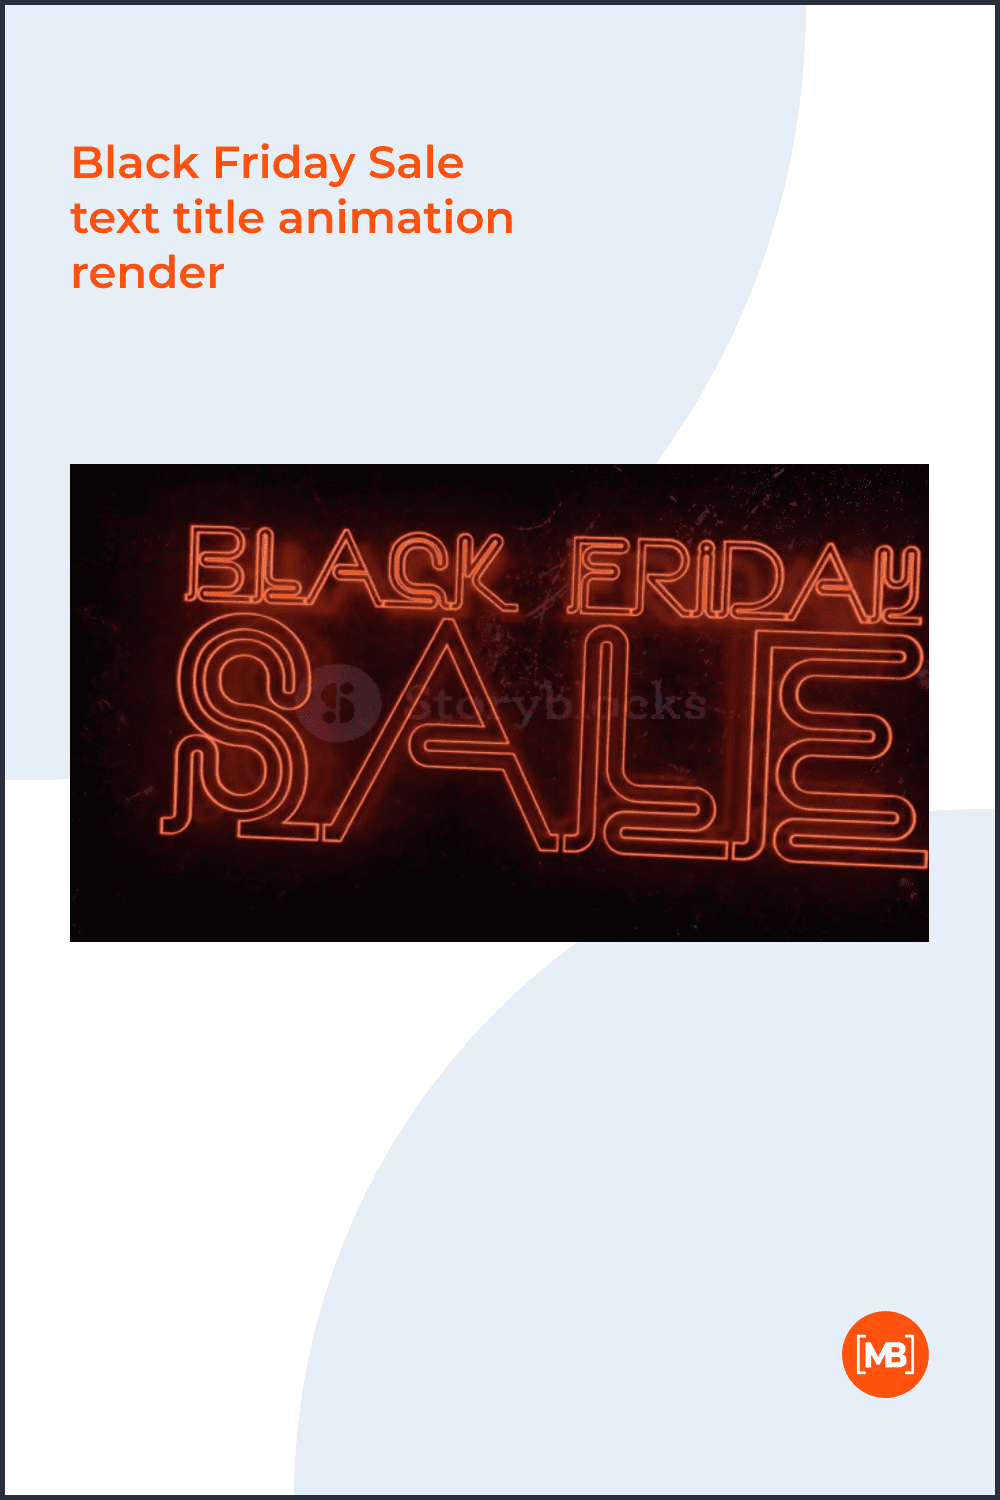 Black Friday sale text title animation render.